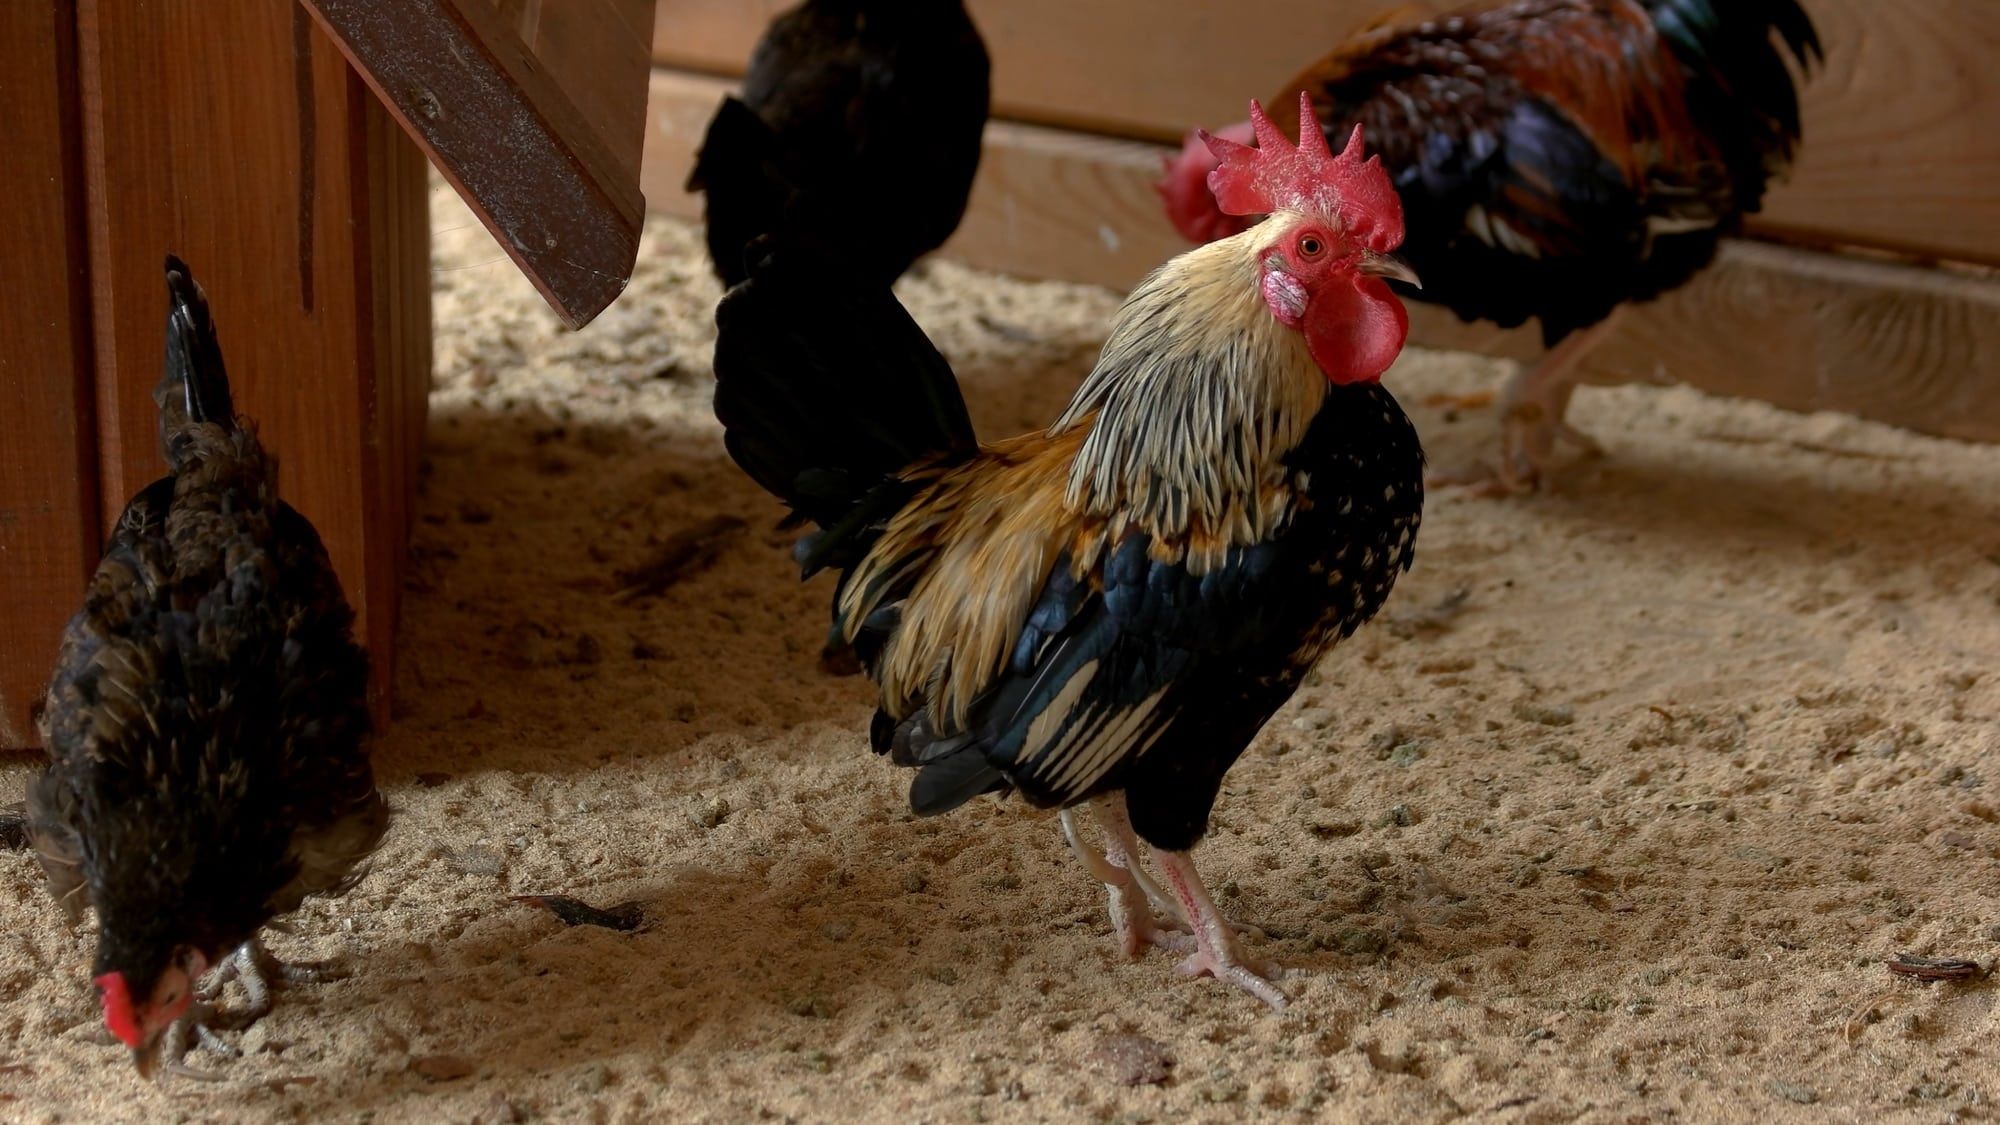 Beautiful colorful rooster in the chicken coop. Adult beautiful rooster with colored feathers walking on the ground in a henhouse.